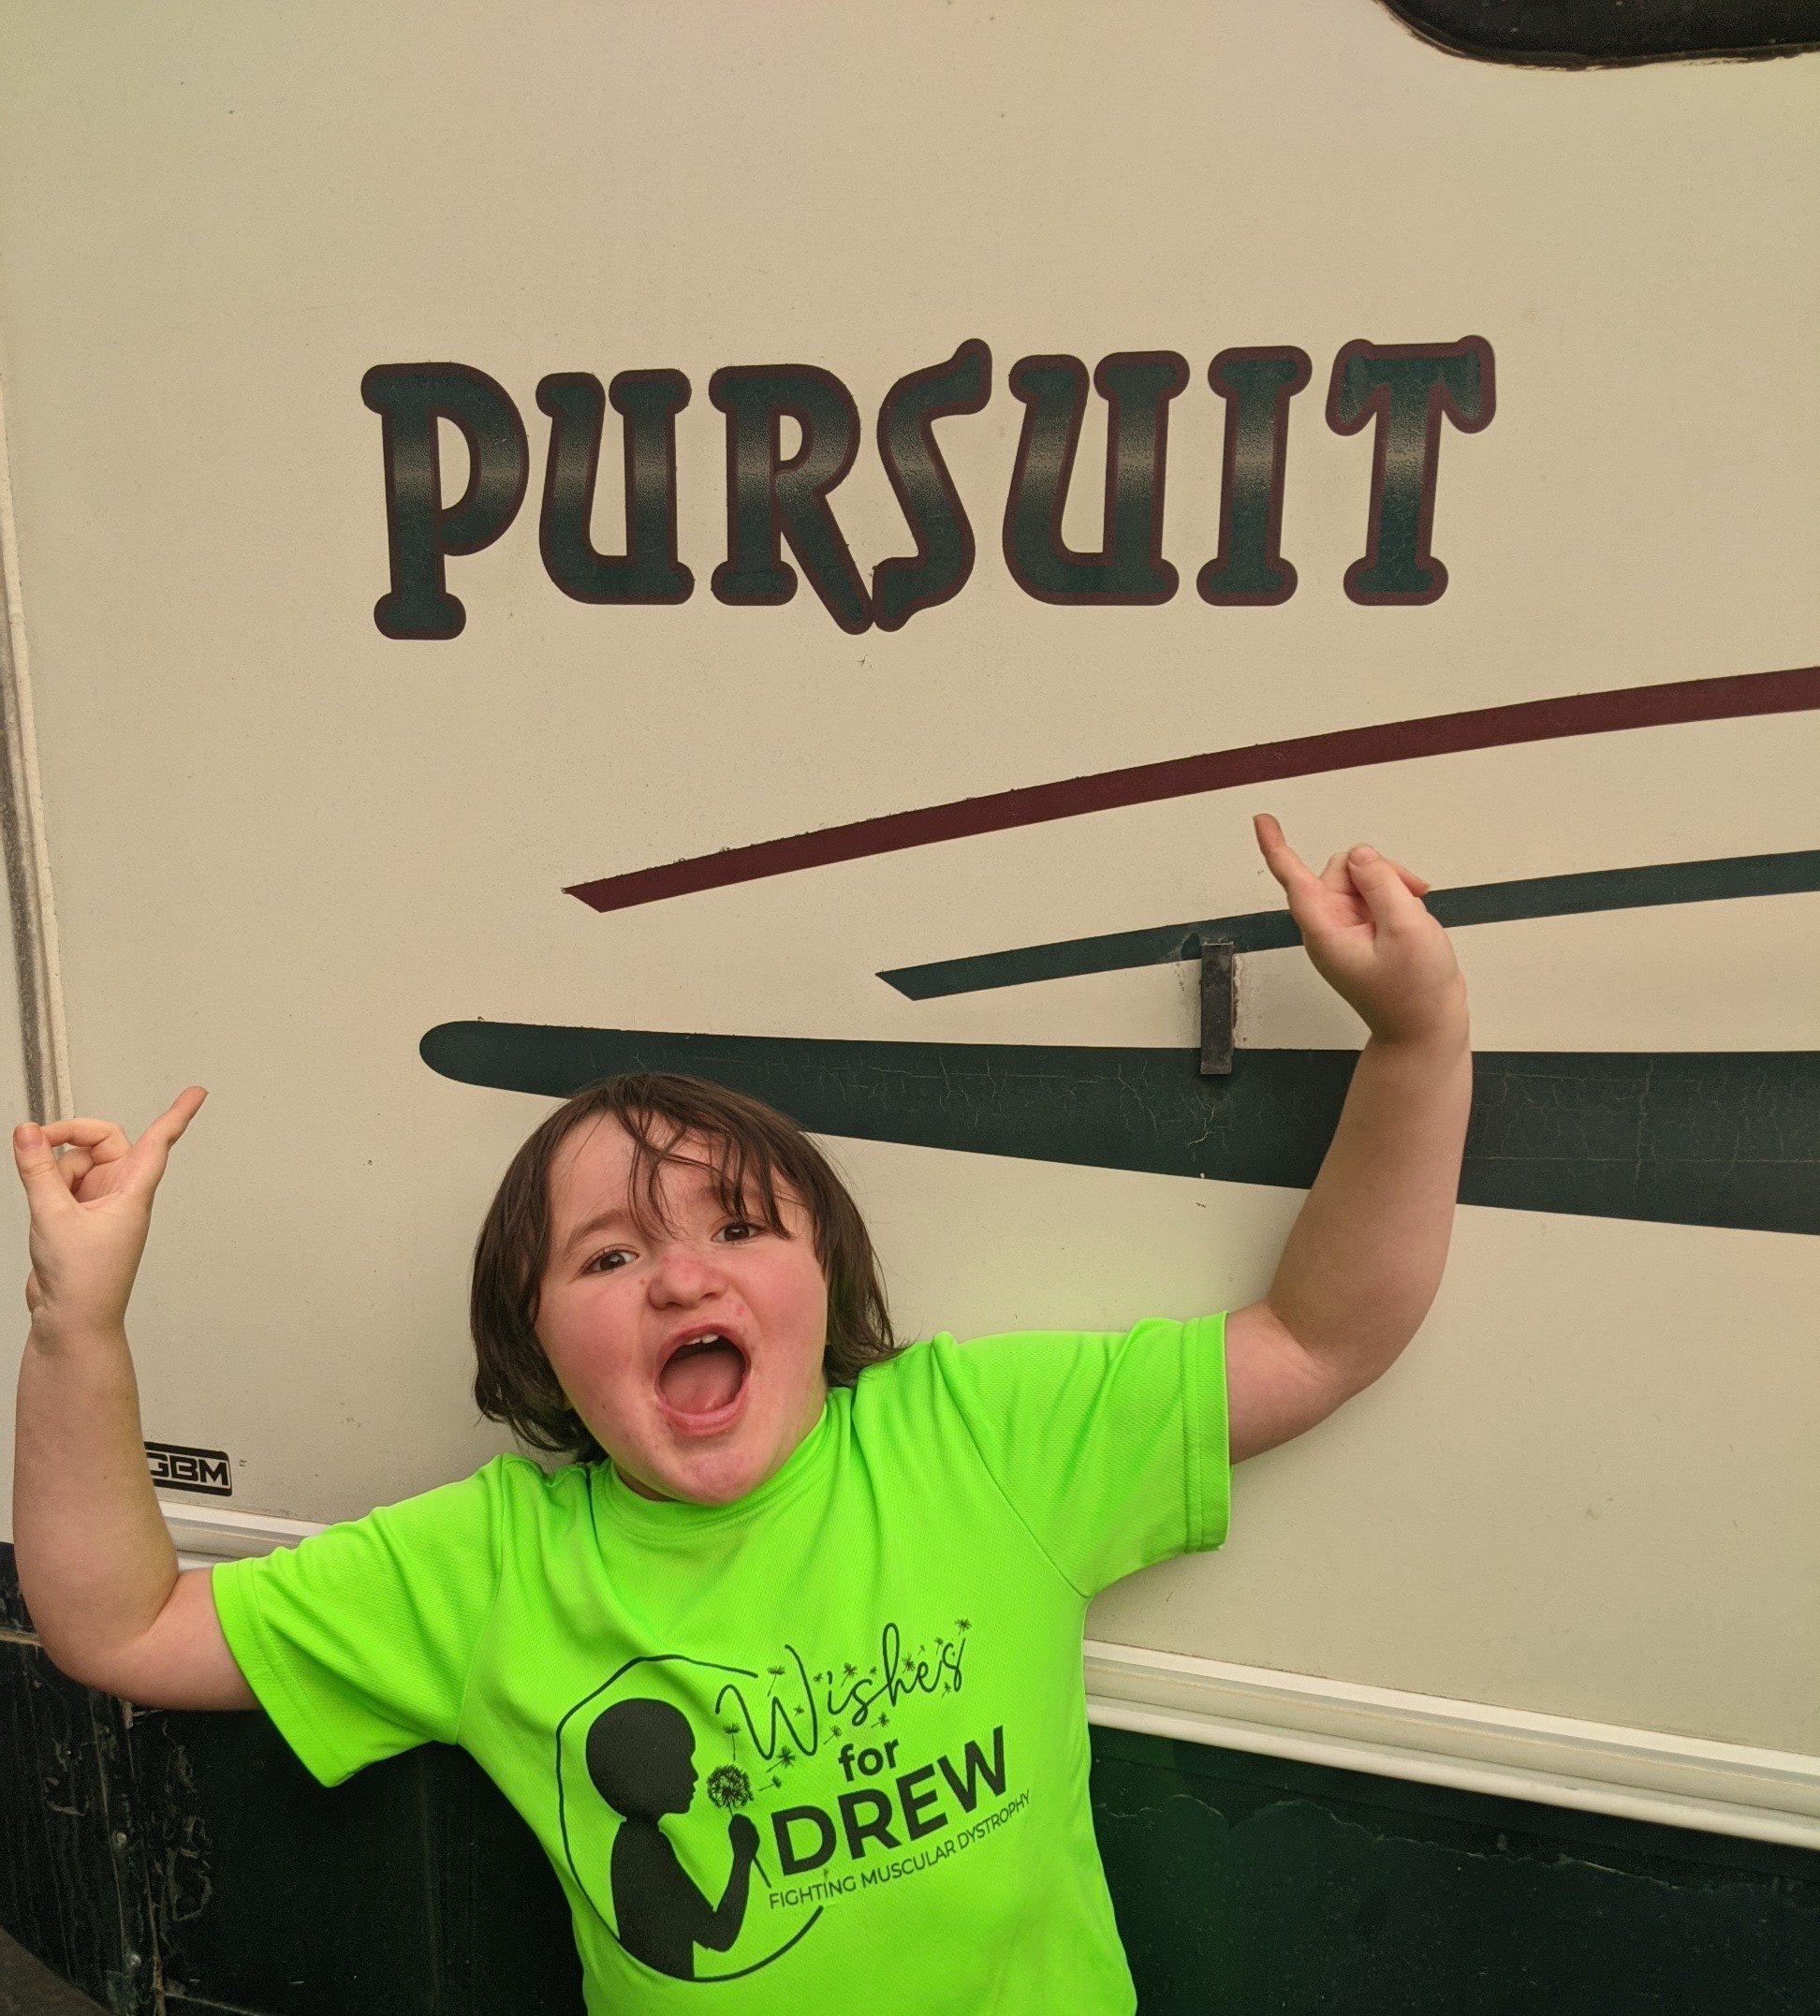 Yes, we lived in an rv called Pursuit!